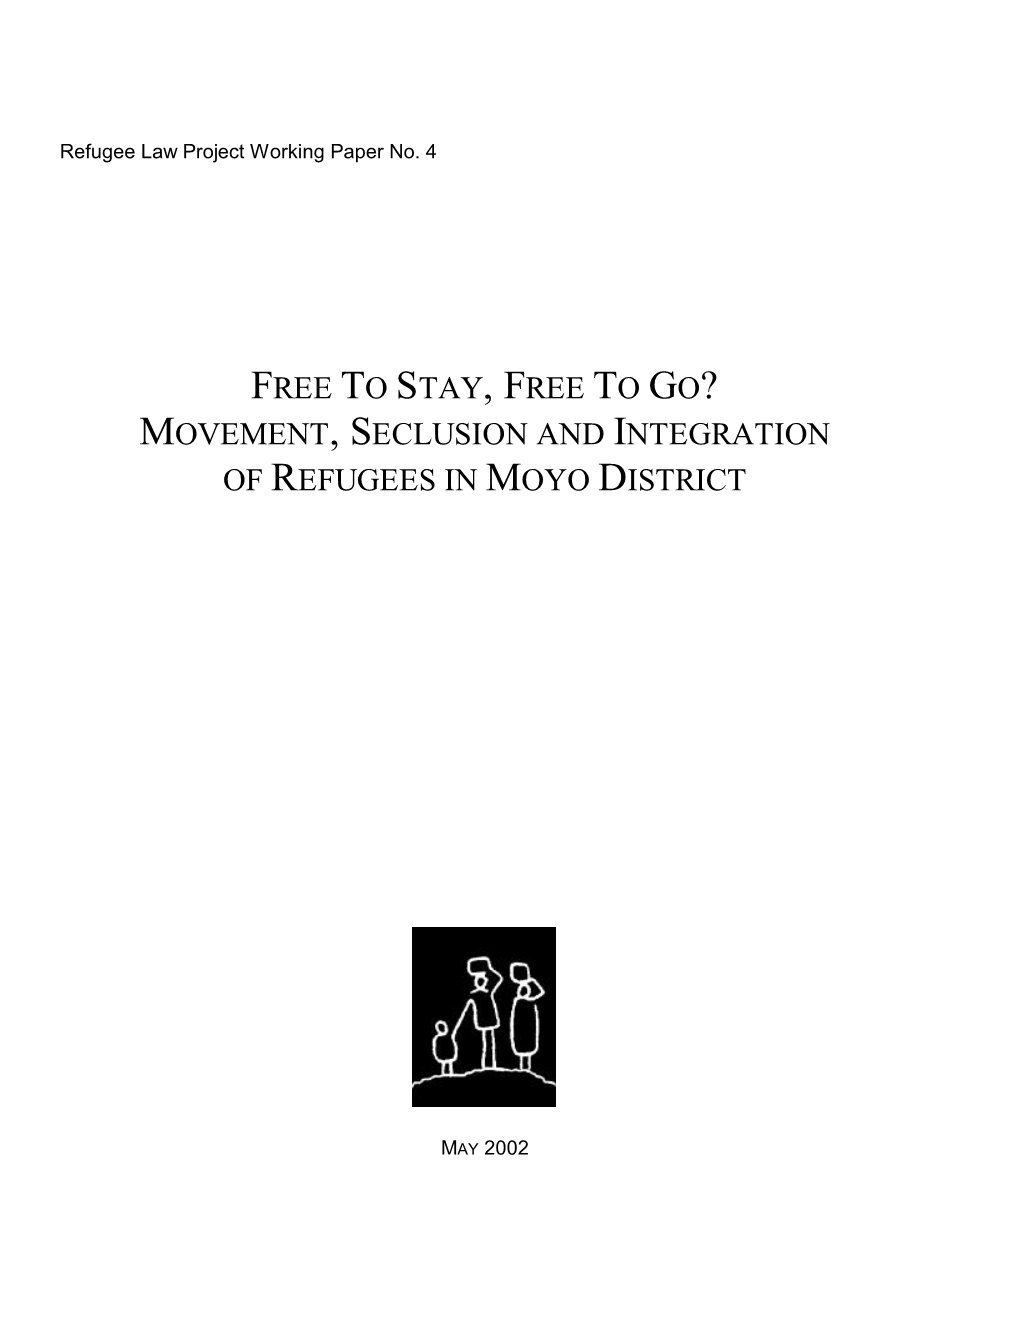 Free to Stay, Free to Go? Movement, Seclusion and Integration of Refugees in Moyo District